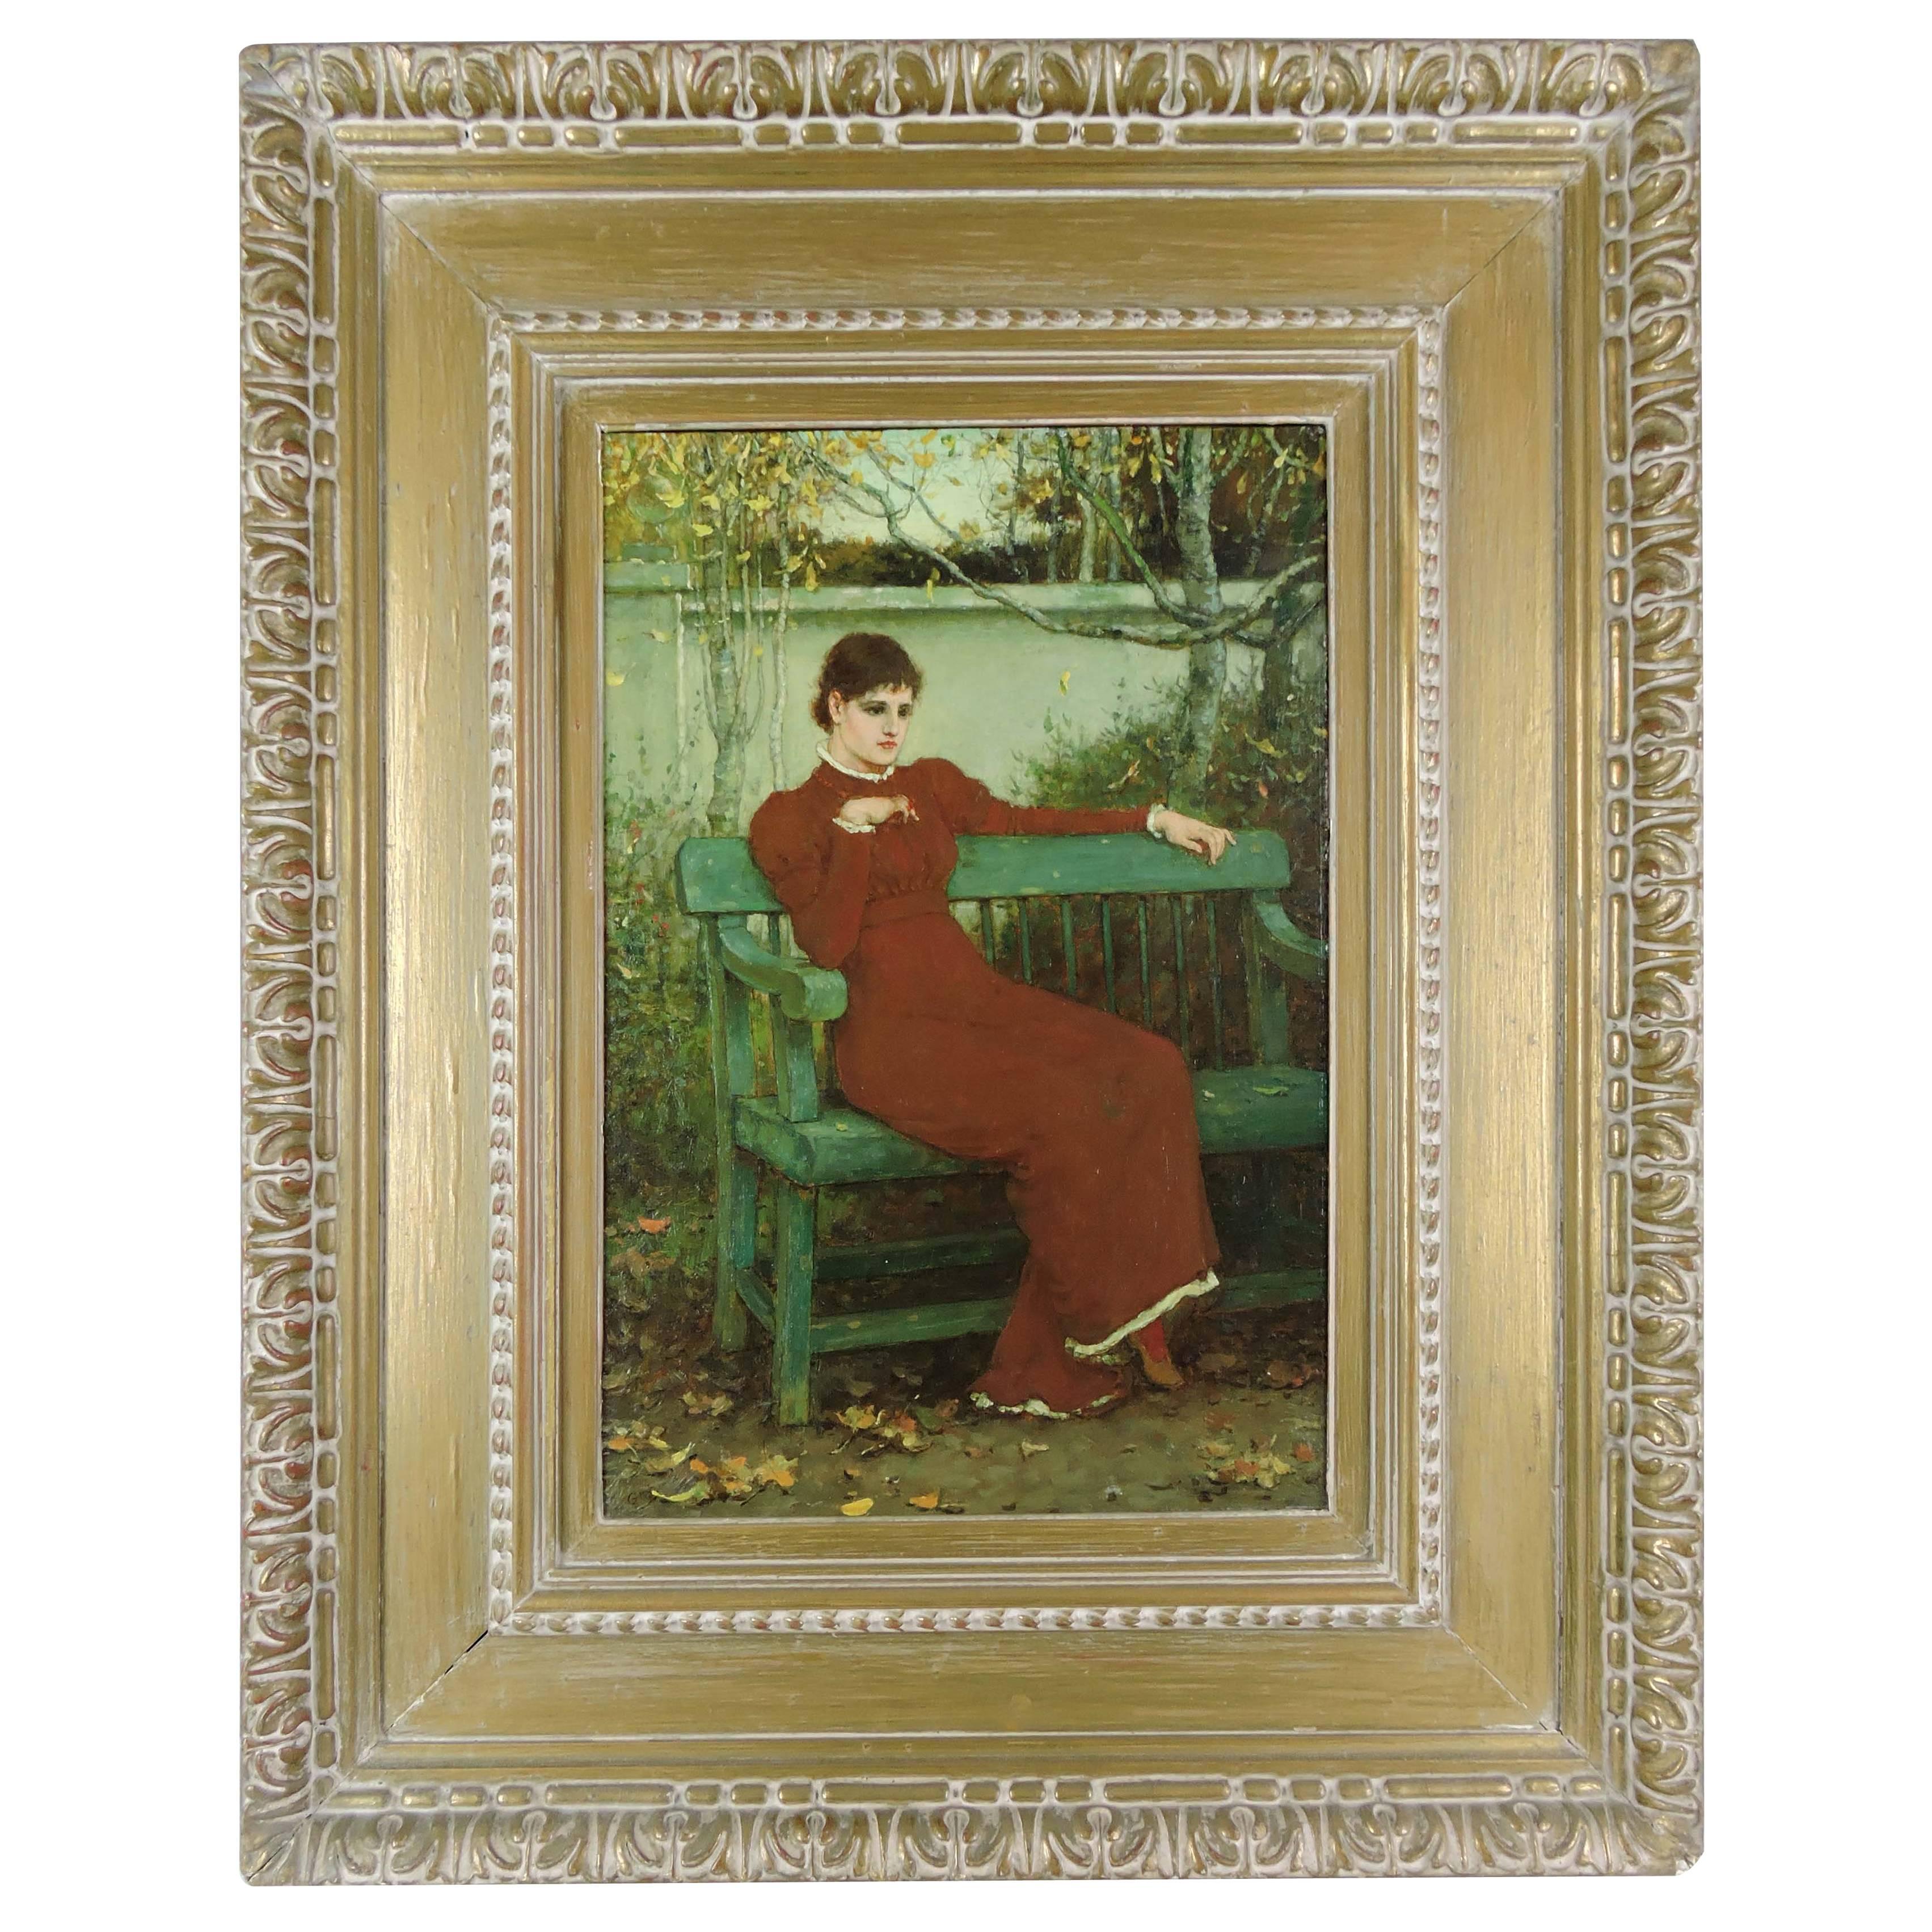 "Autumn" American / British Oil on Canvas by George Henry Boughton, R.A., 1881 For Sale